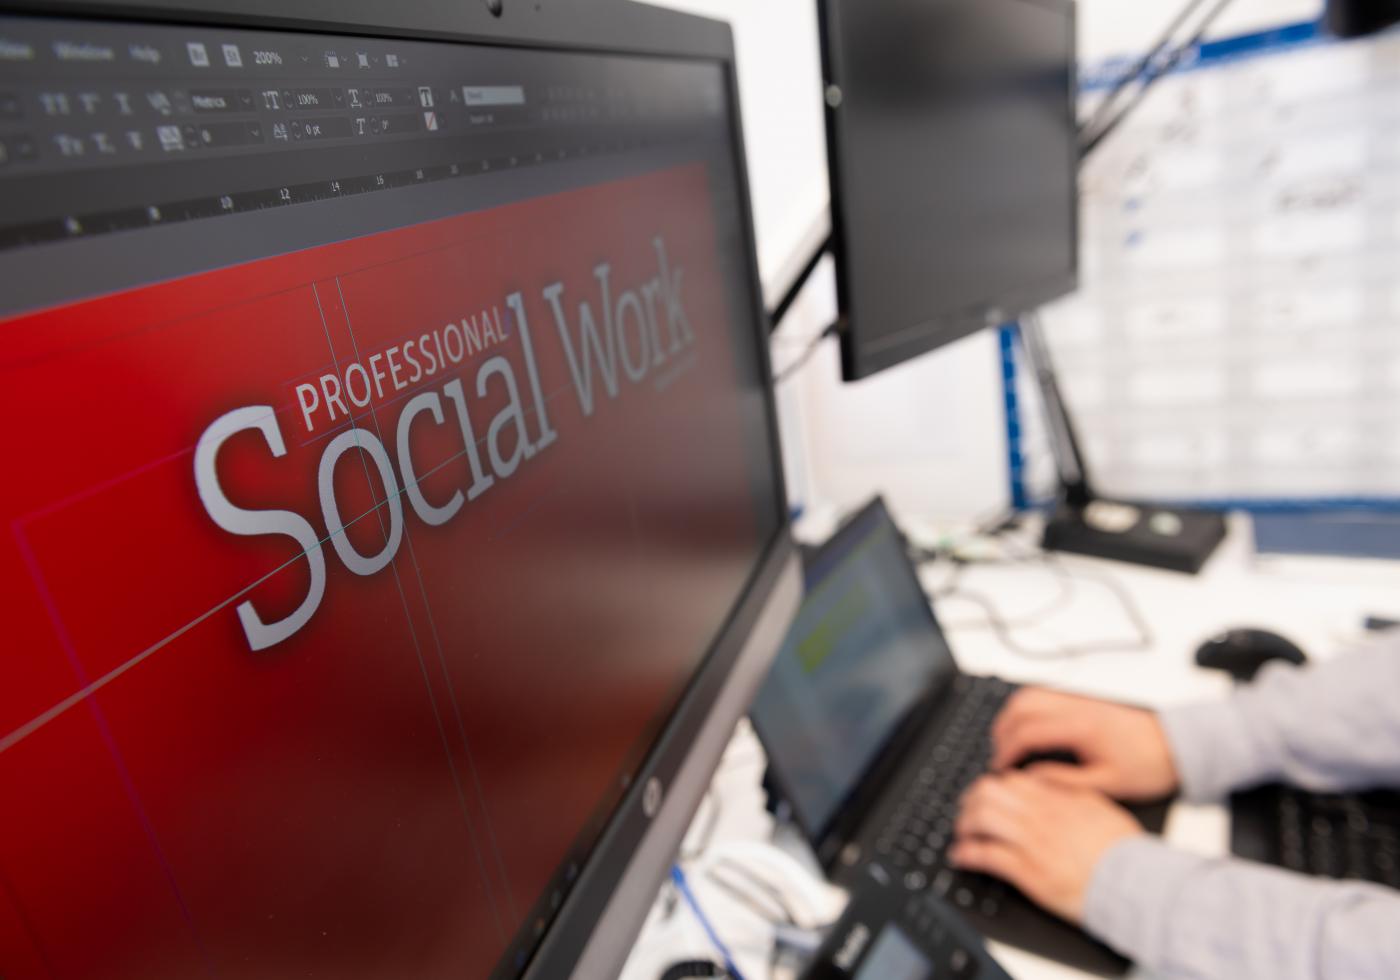 Professional Social Work Magazine being developed